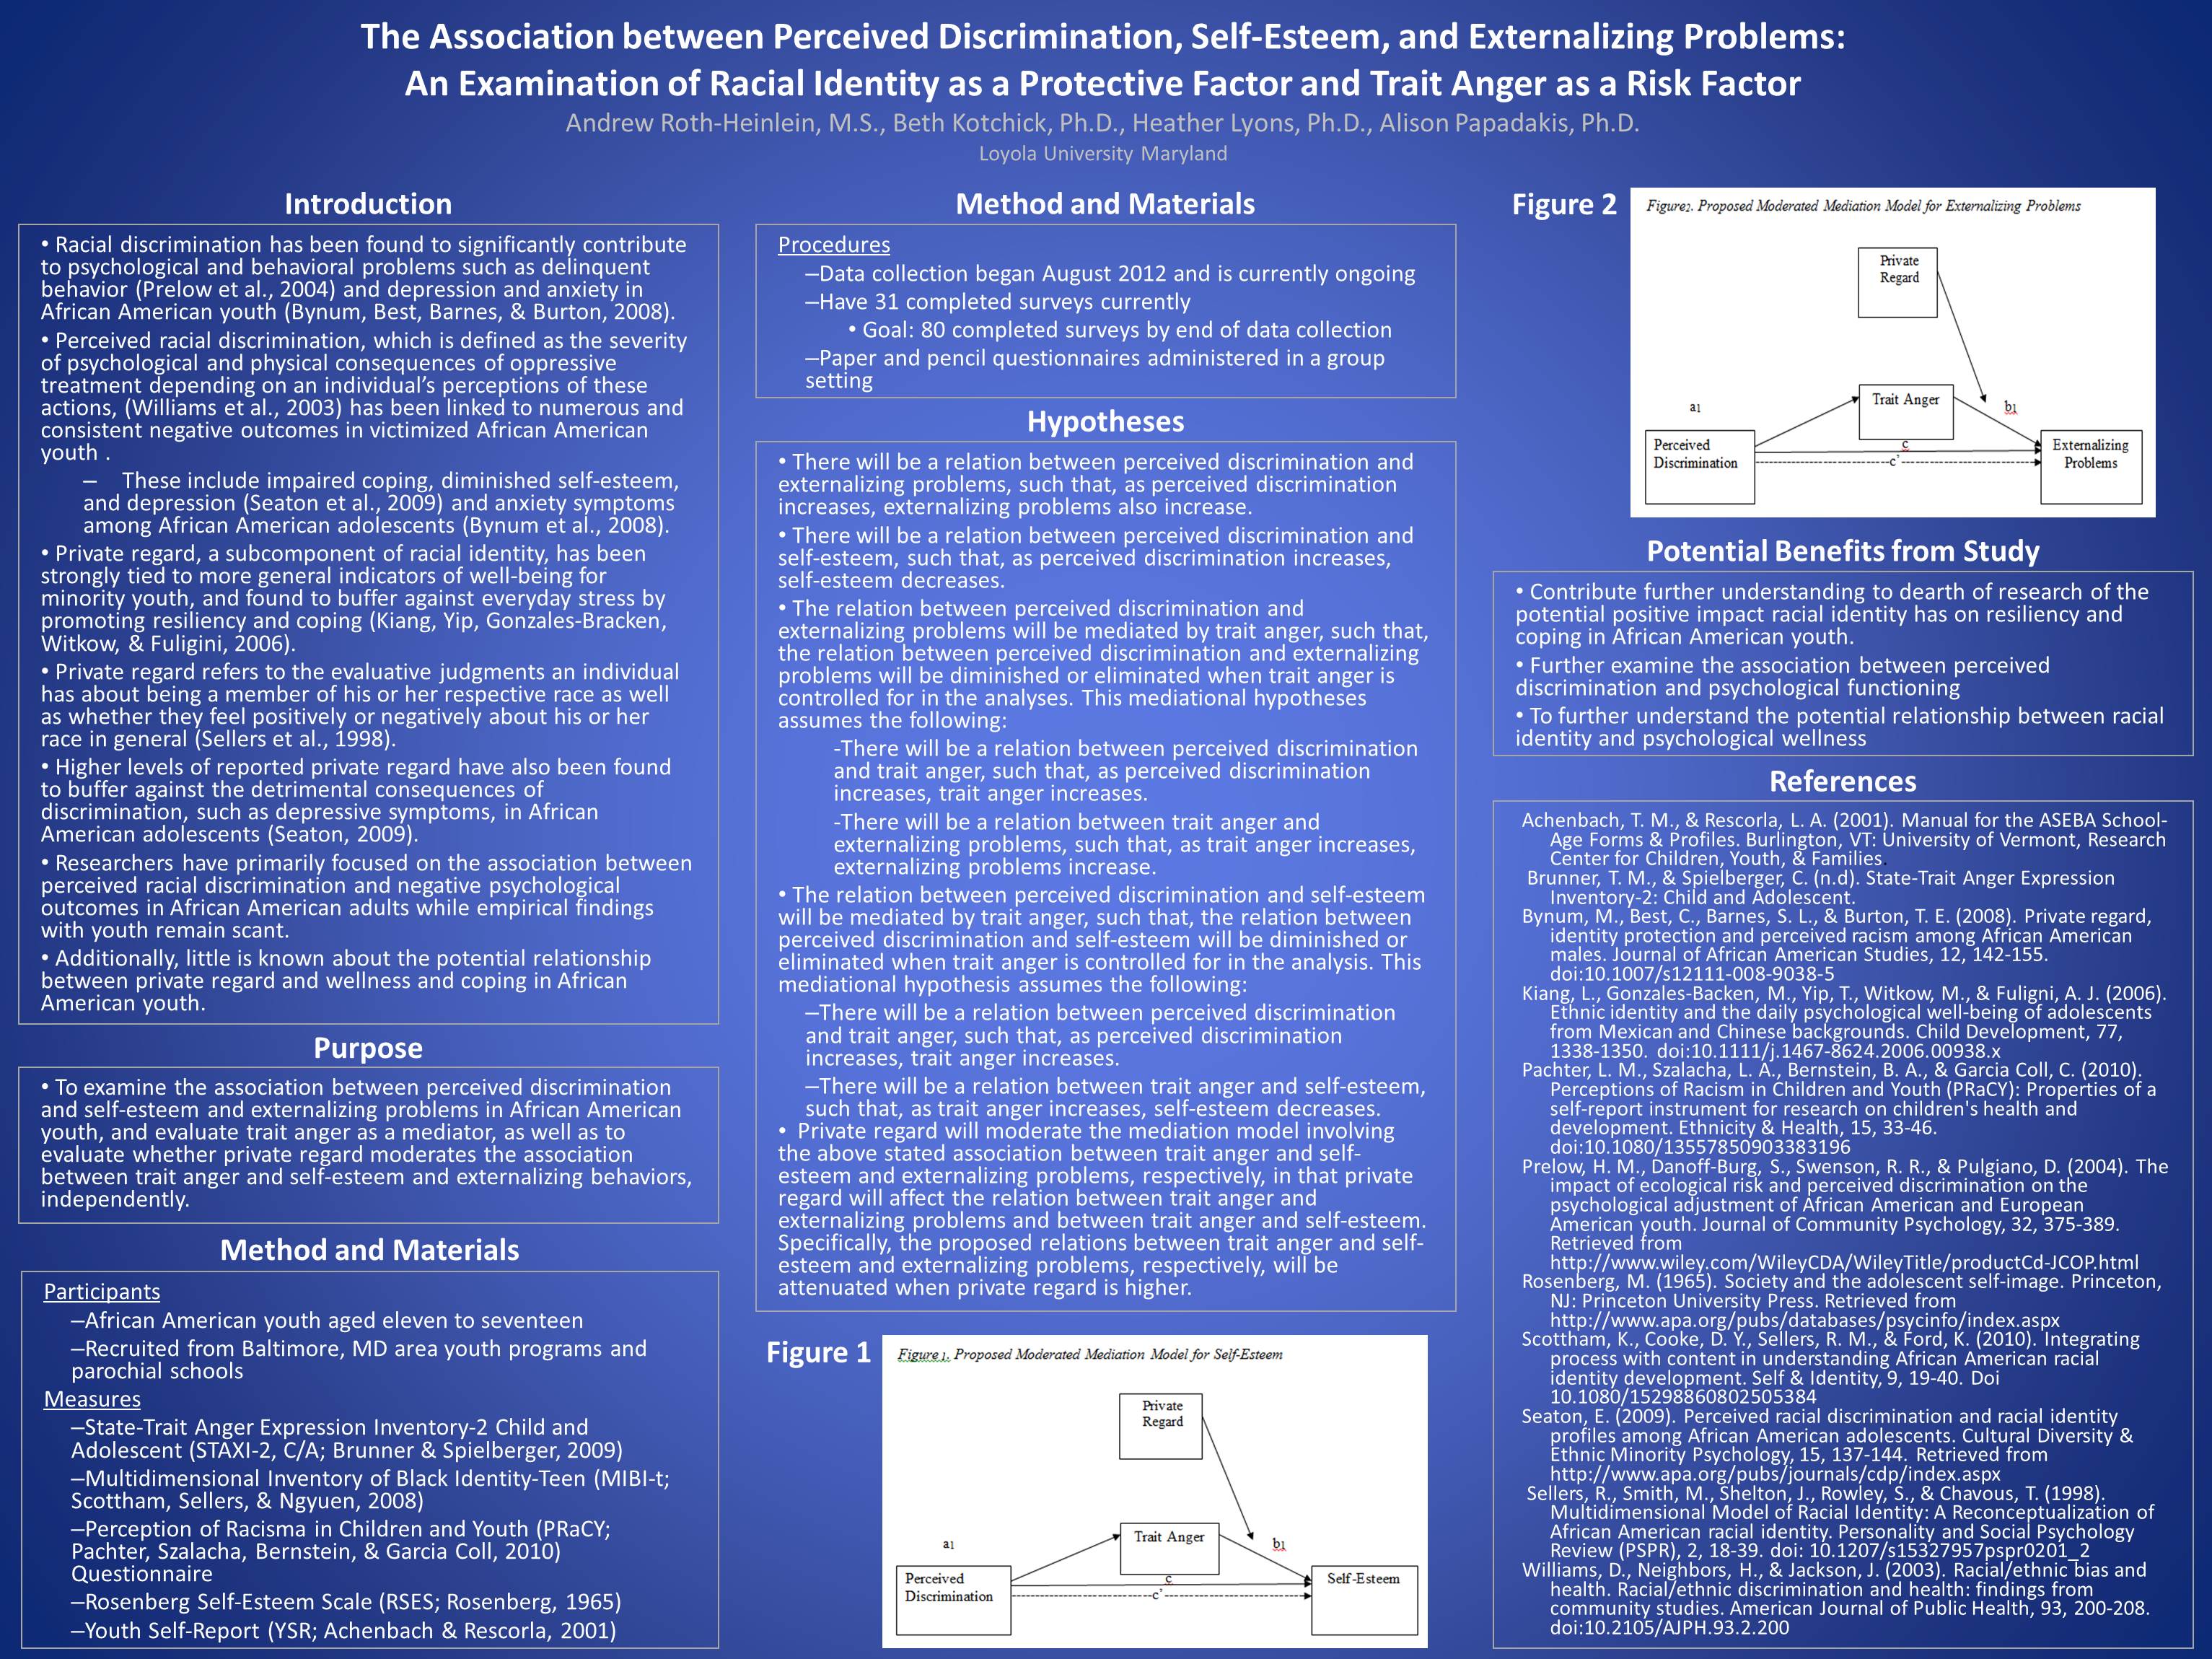 Enlarged poster image: The Association between Perceived Discrimination, Self-Esteem, and Externalizing Problems: An Examination of Racial Identity as a Protective Factor and Trait Anger as a Risk Factor